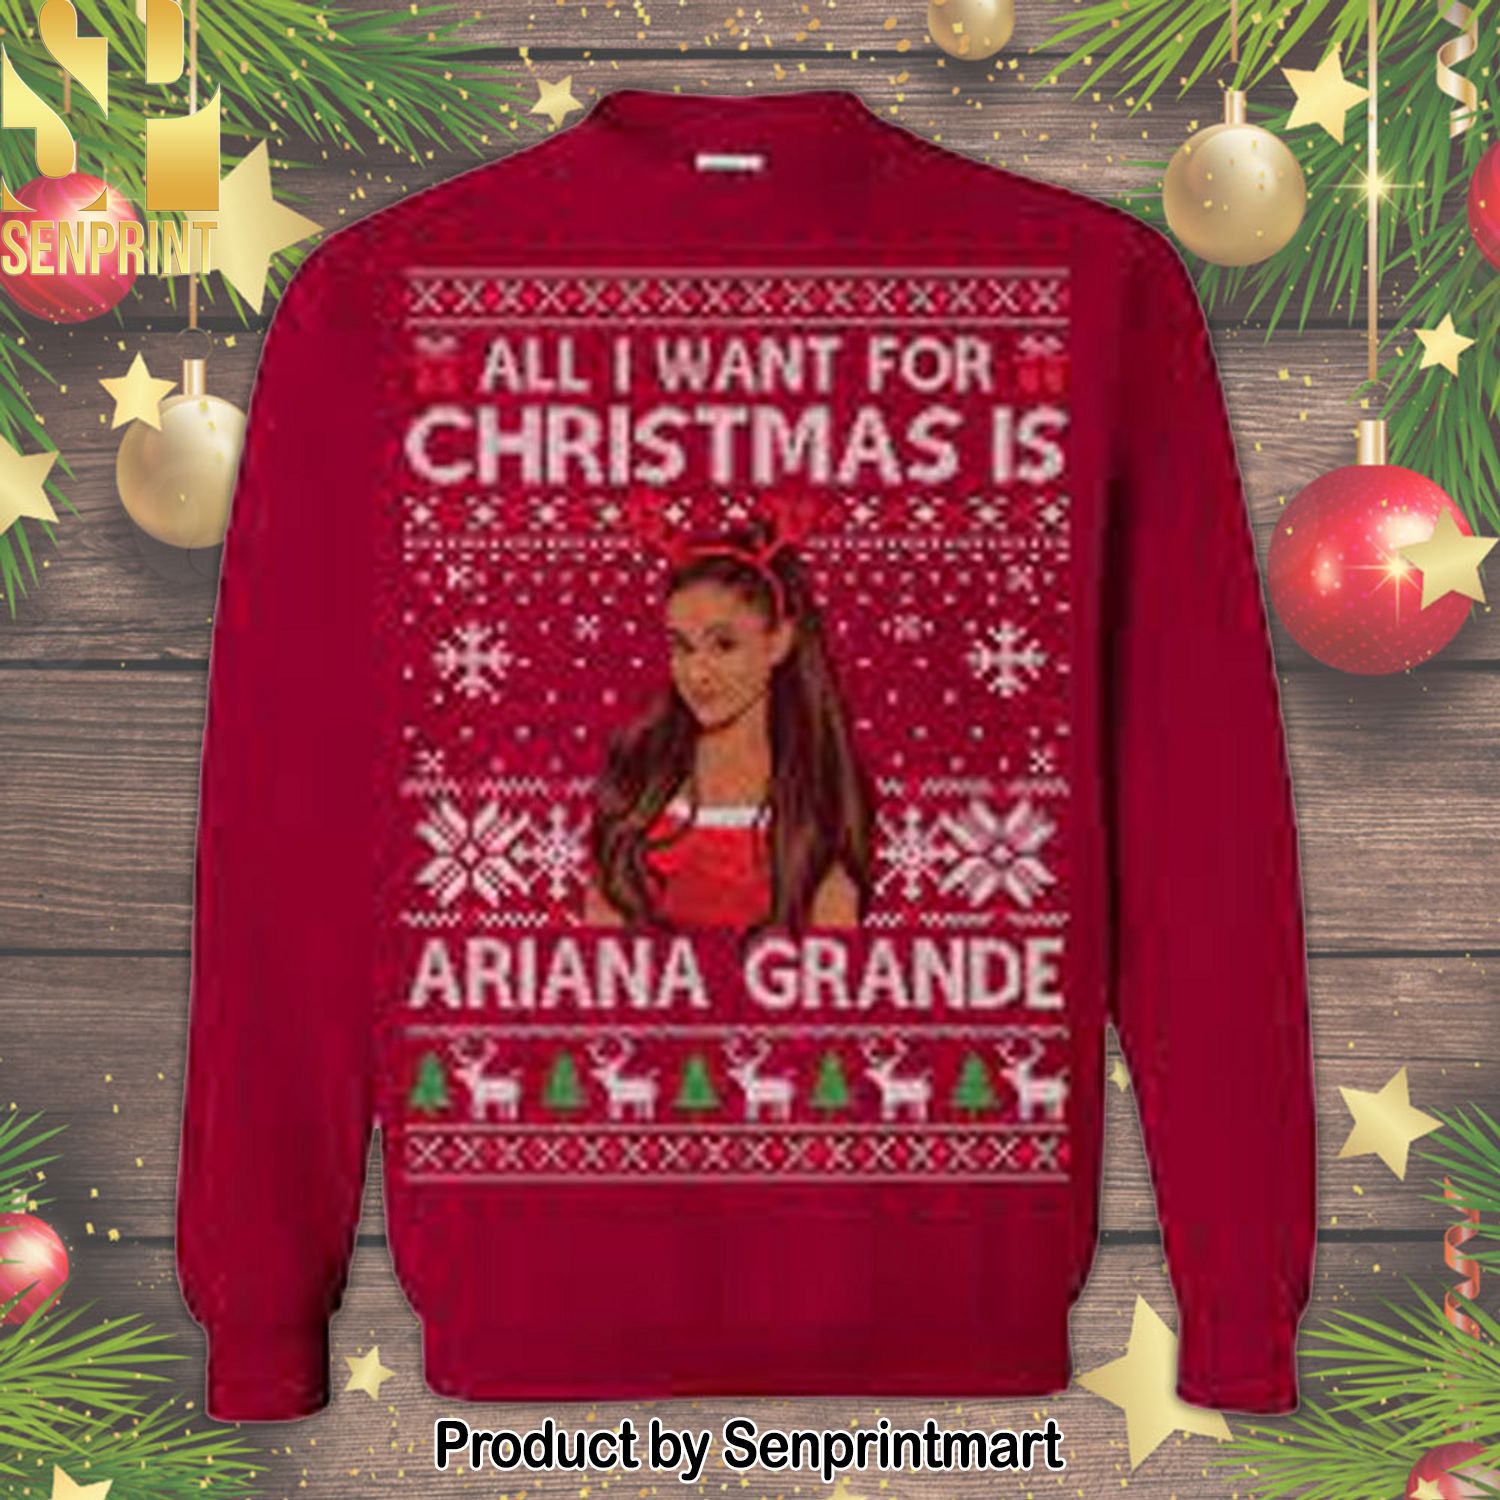 Ariana Grande Ugly Xmas Wool Knitted Sweater